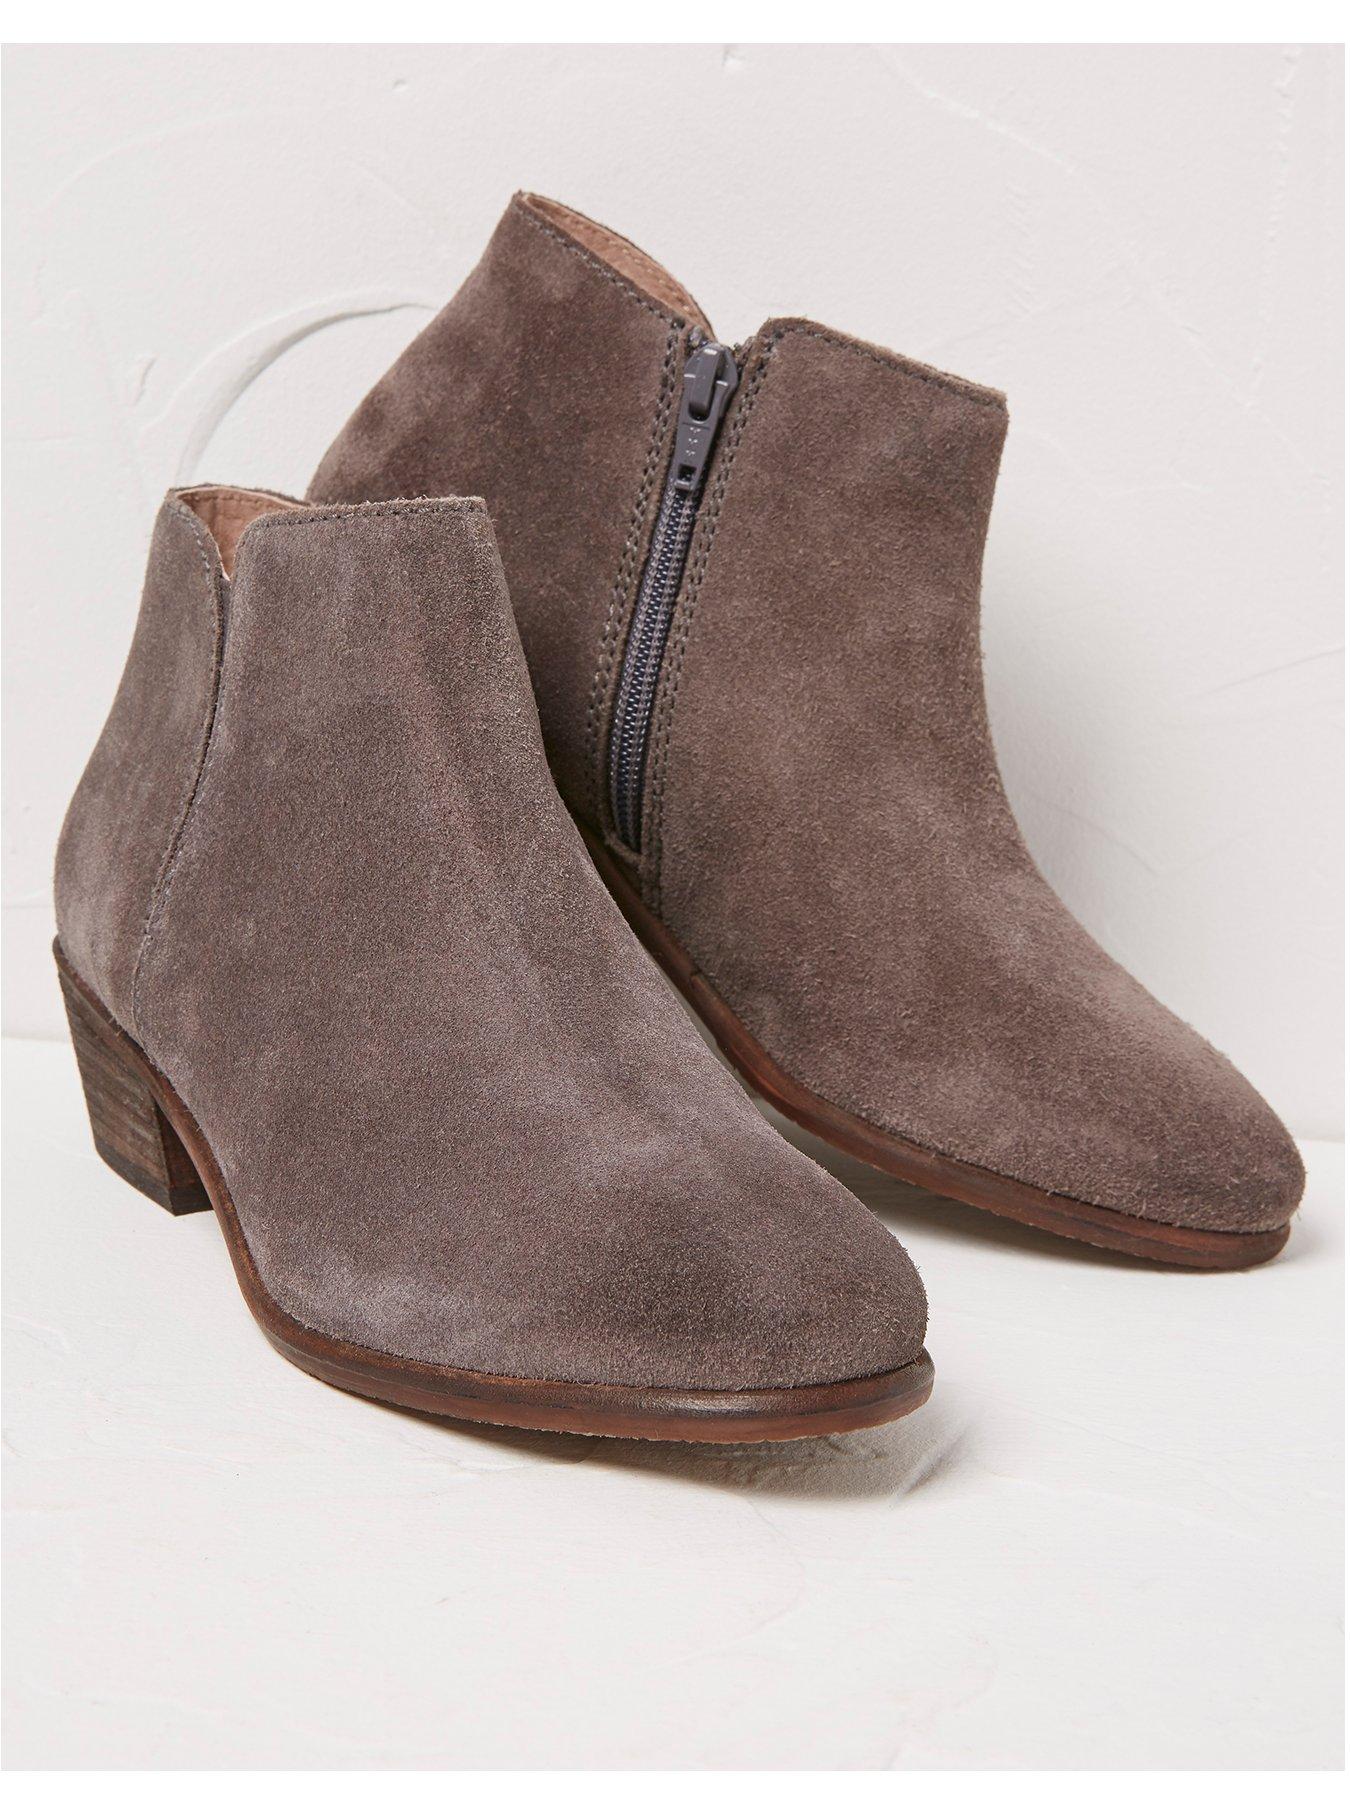 fatface grey boots